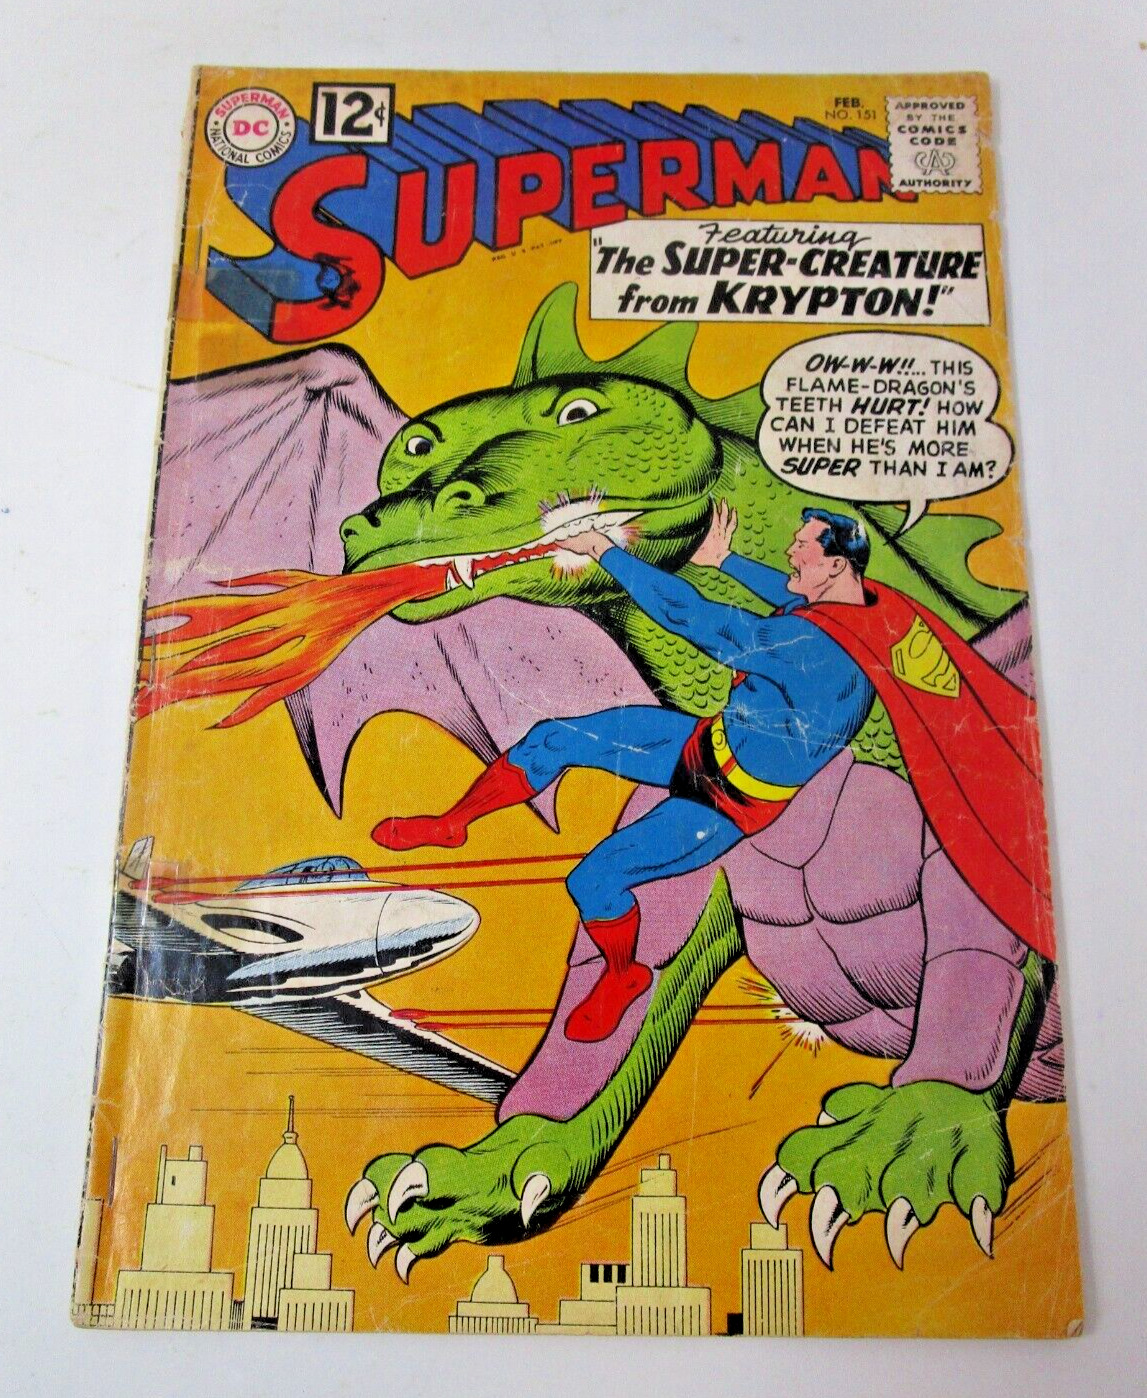 Superman #151 1962 [GD/VG] Silver Age DC Super Creature from Krypton